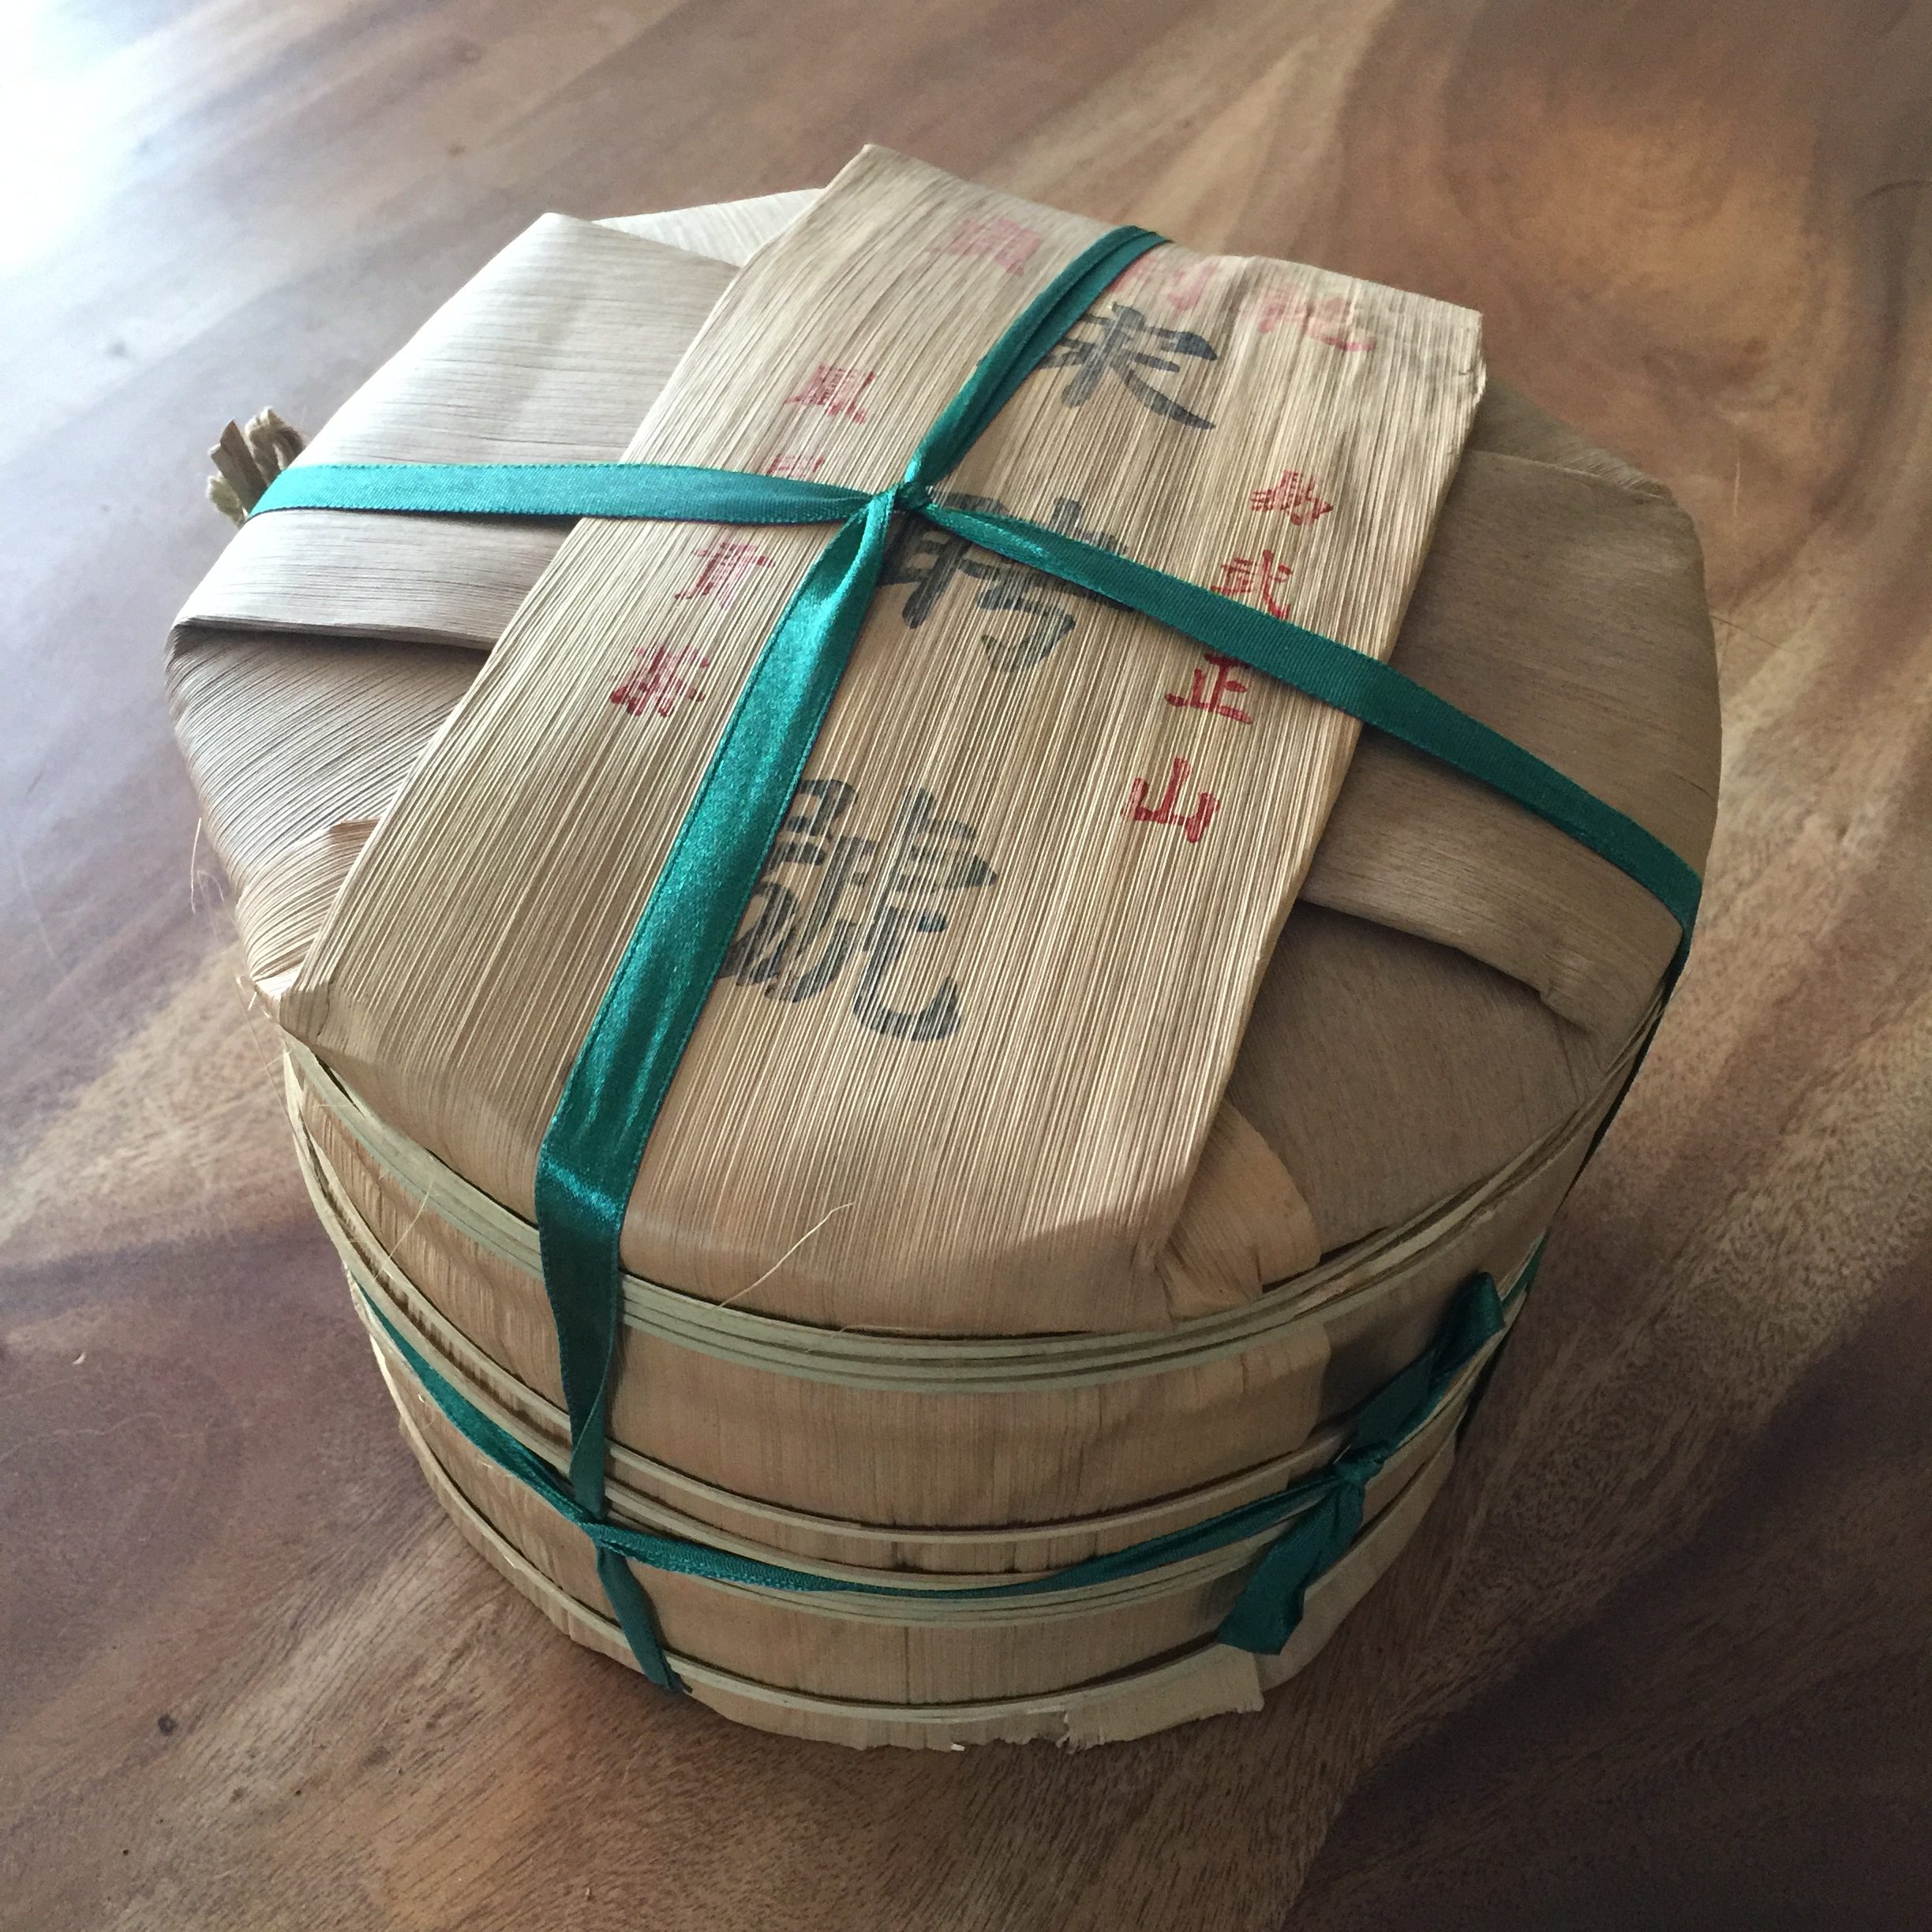 Aging and storing puerh in the west